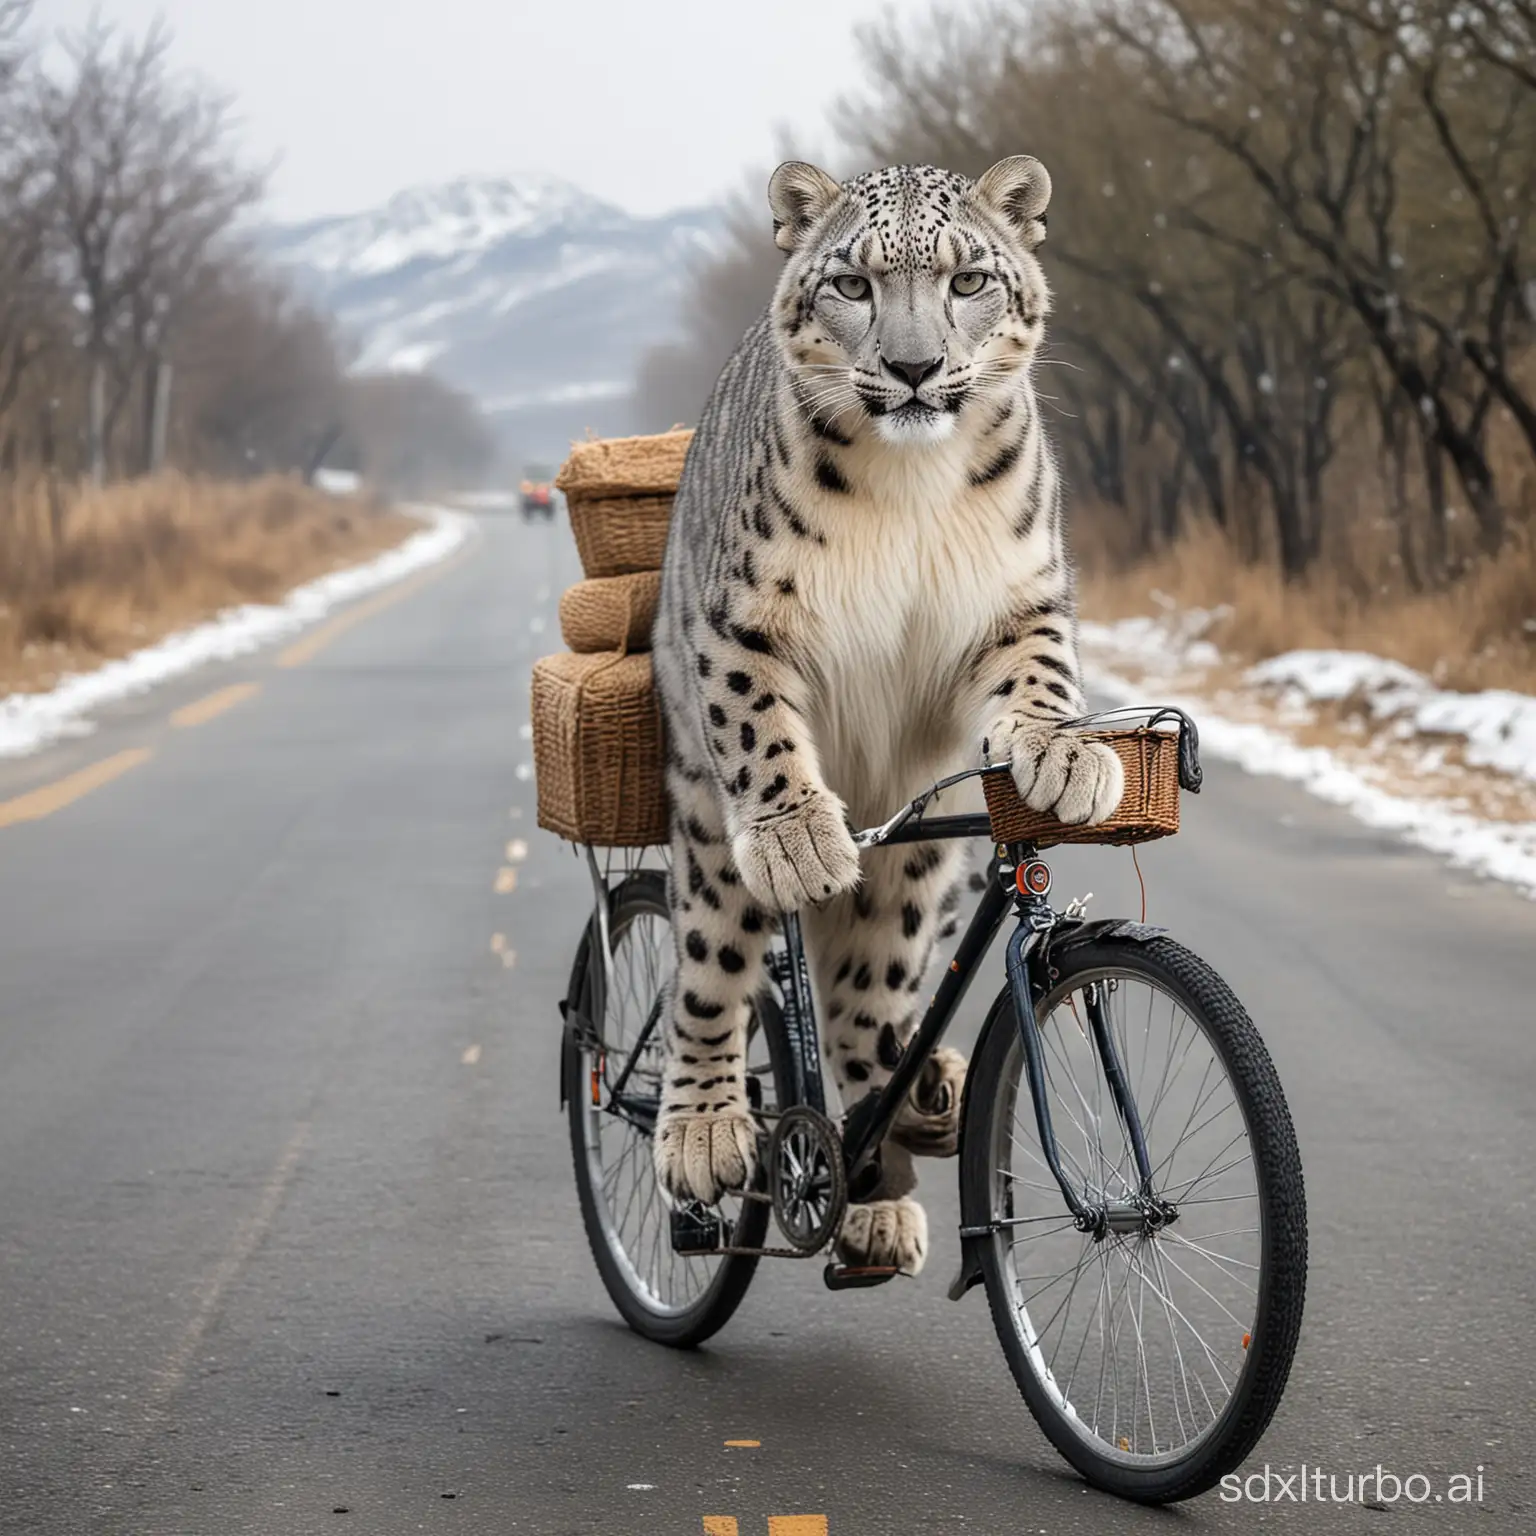 Snow-Leopard-Riding-Bicycle-on-Snowy-Road